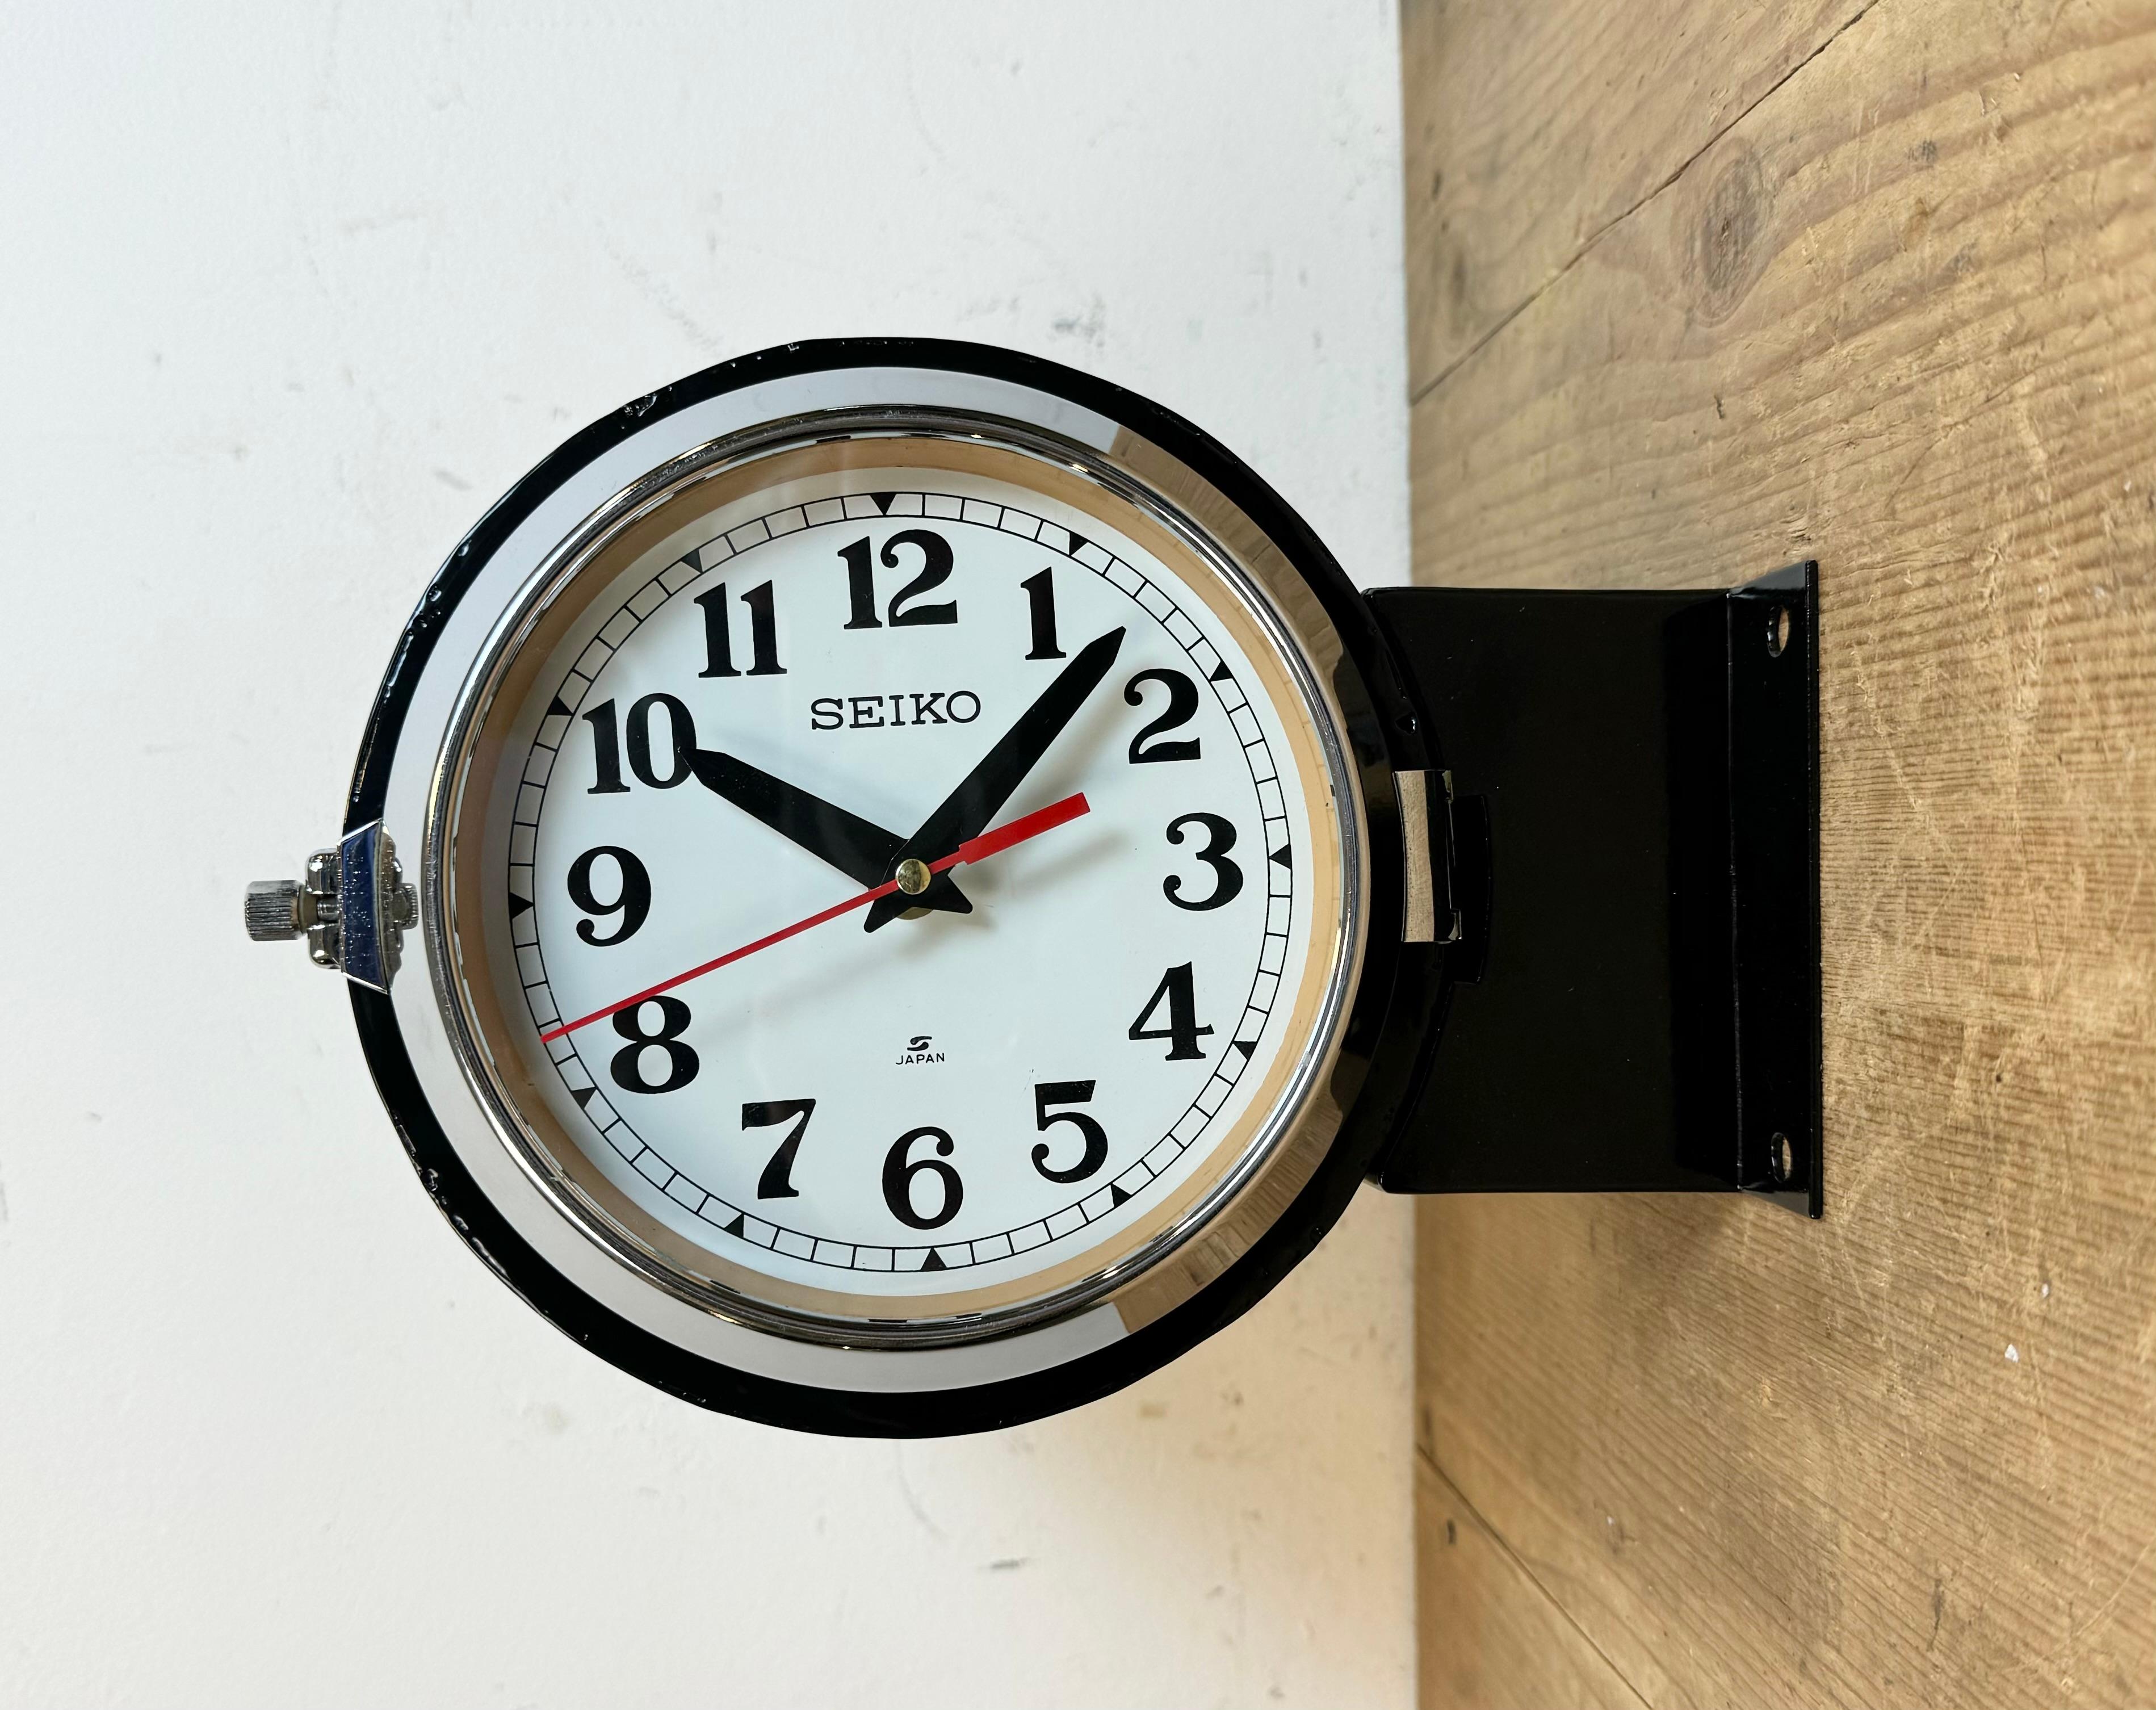 Vintage Industrial Seiko navy slave clock made in Japan during the 1980s. These clocks were used on large tankers and cargo ships. It features a black metal body, a metal dials and a clear glass covers with chrome frames. Former slave clock has been